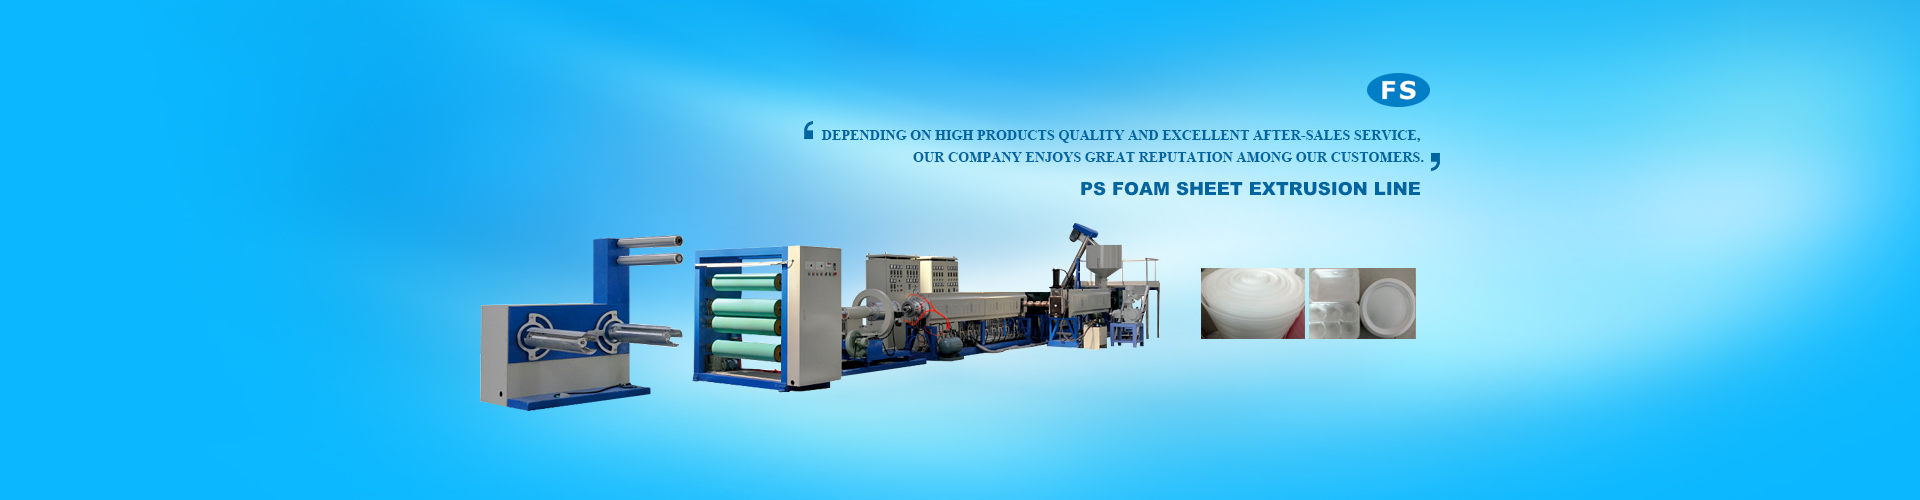 PS Foam Sheet Extrusion Line?????